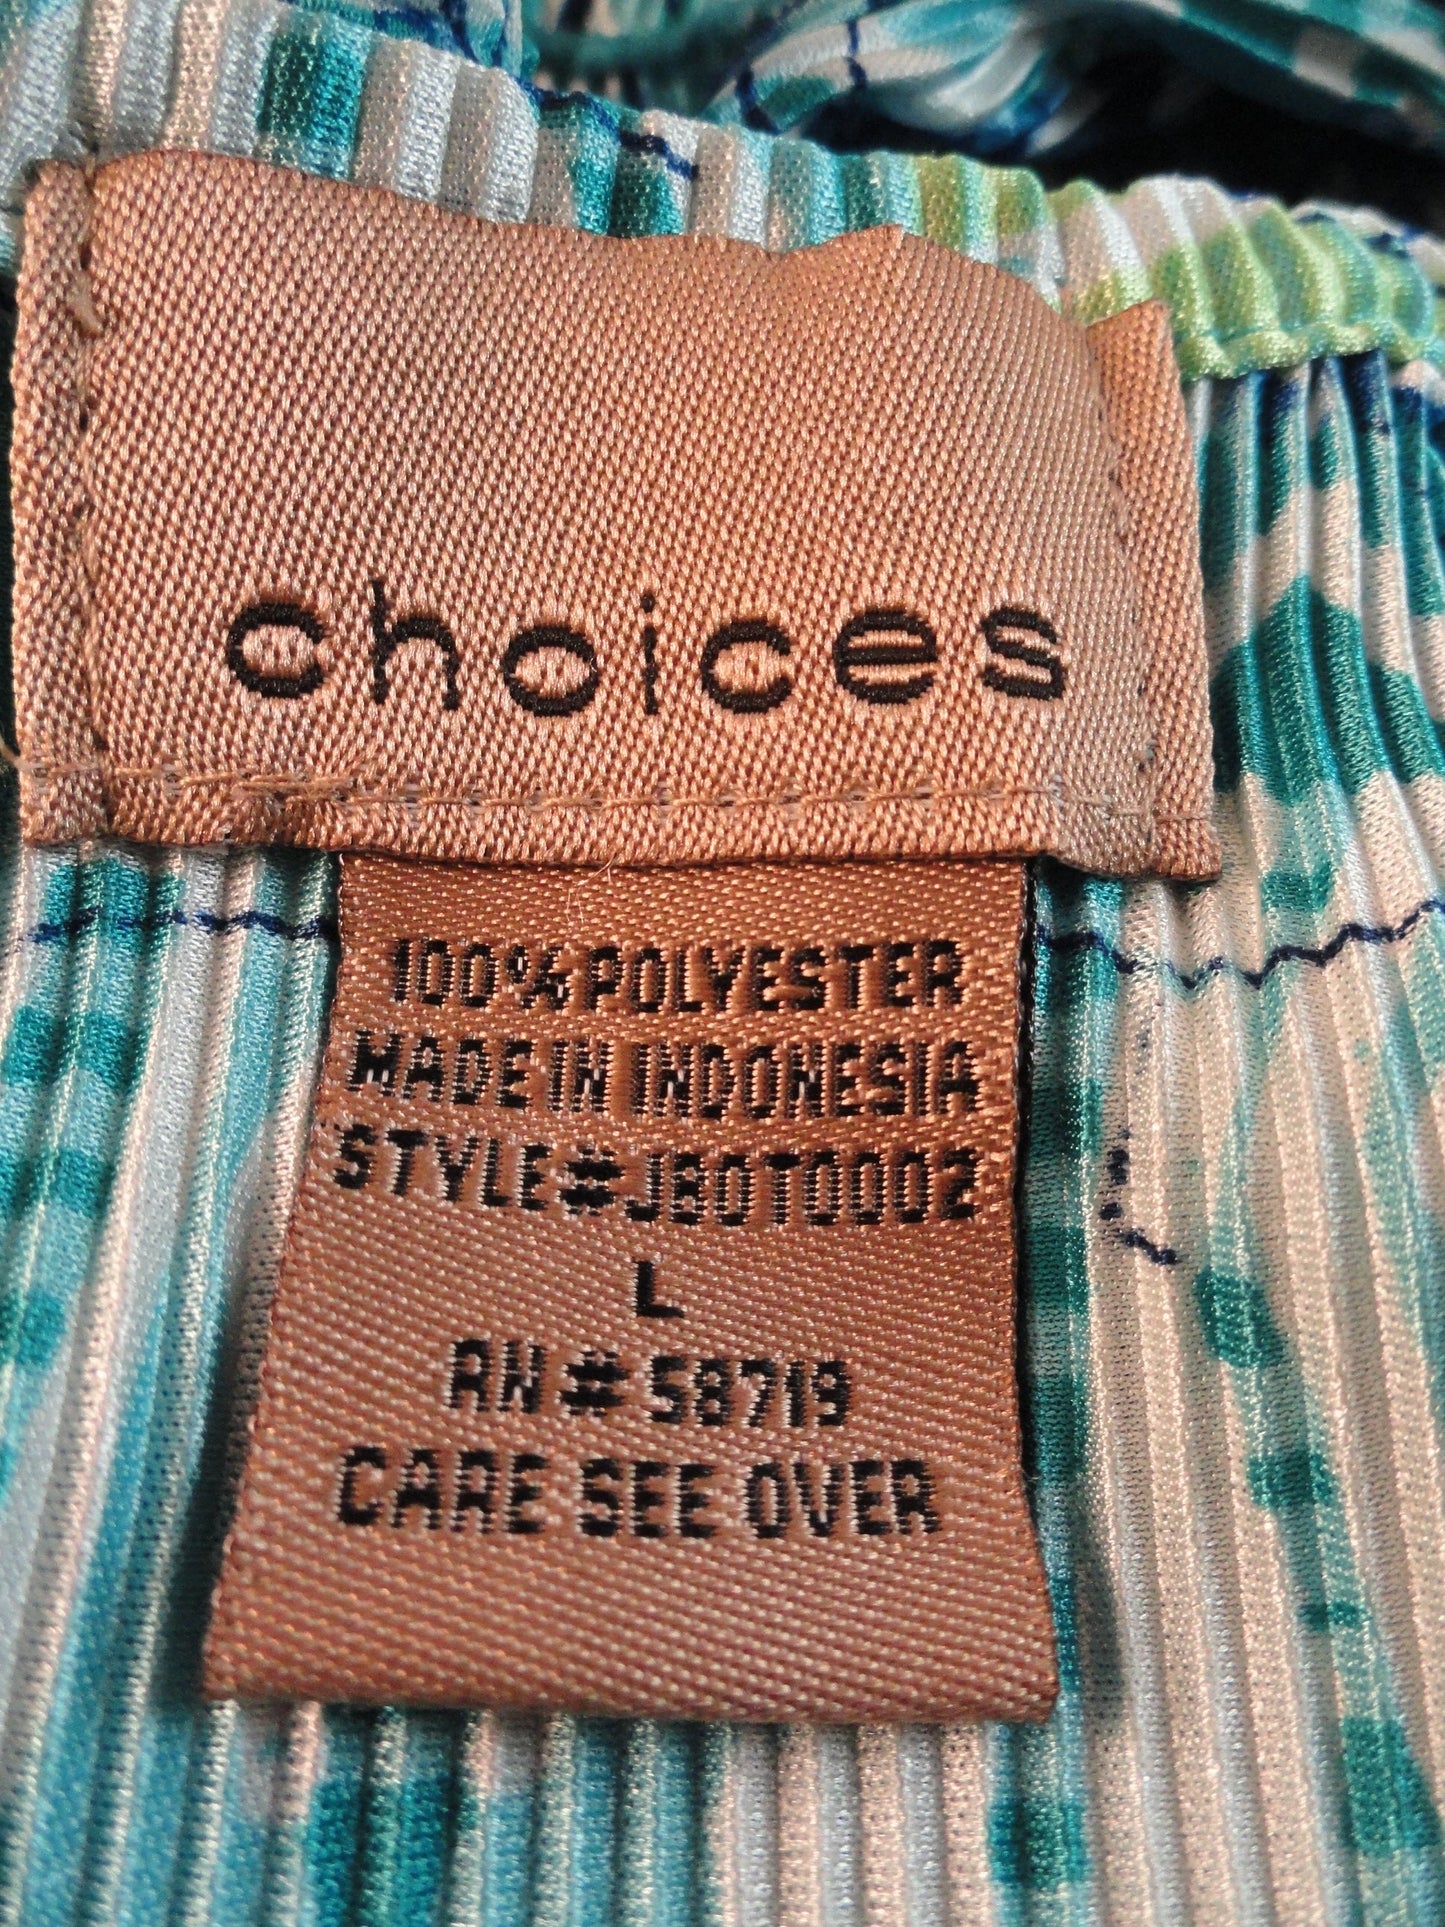 Choices 70's Tank Top Blue Size Large (SKU 000025)